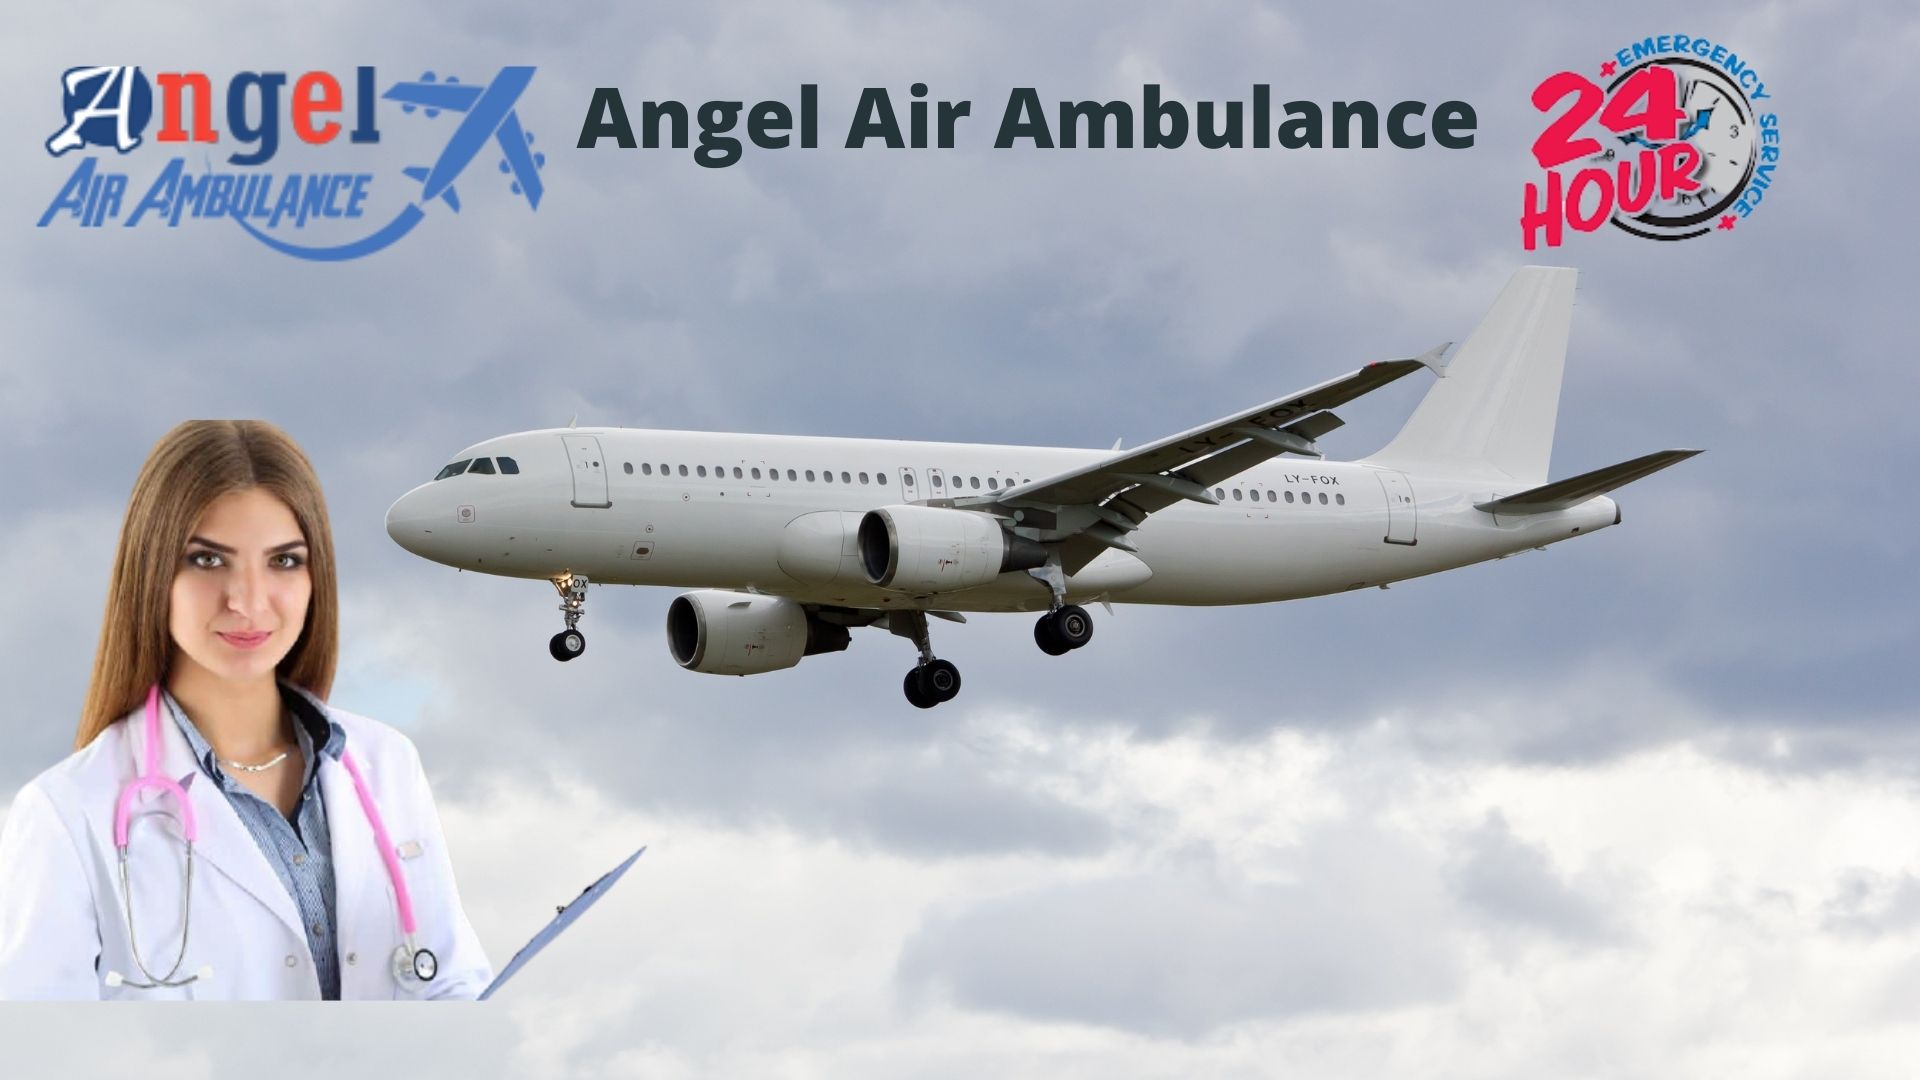 Book Angel Air Ambulance Service in Chennai for Expeditious Air Medical Transportation of Patients